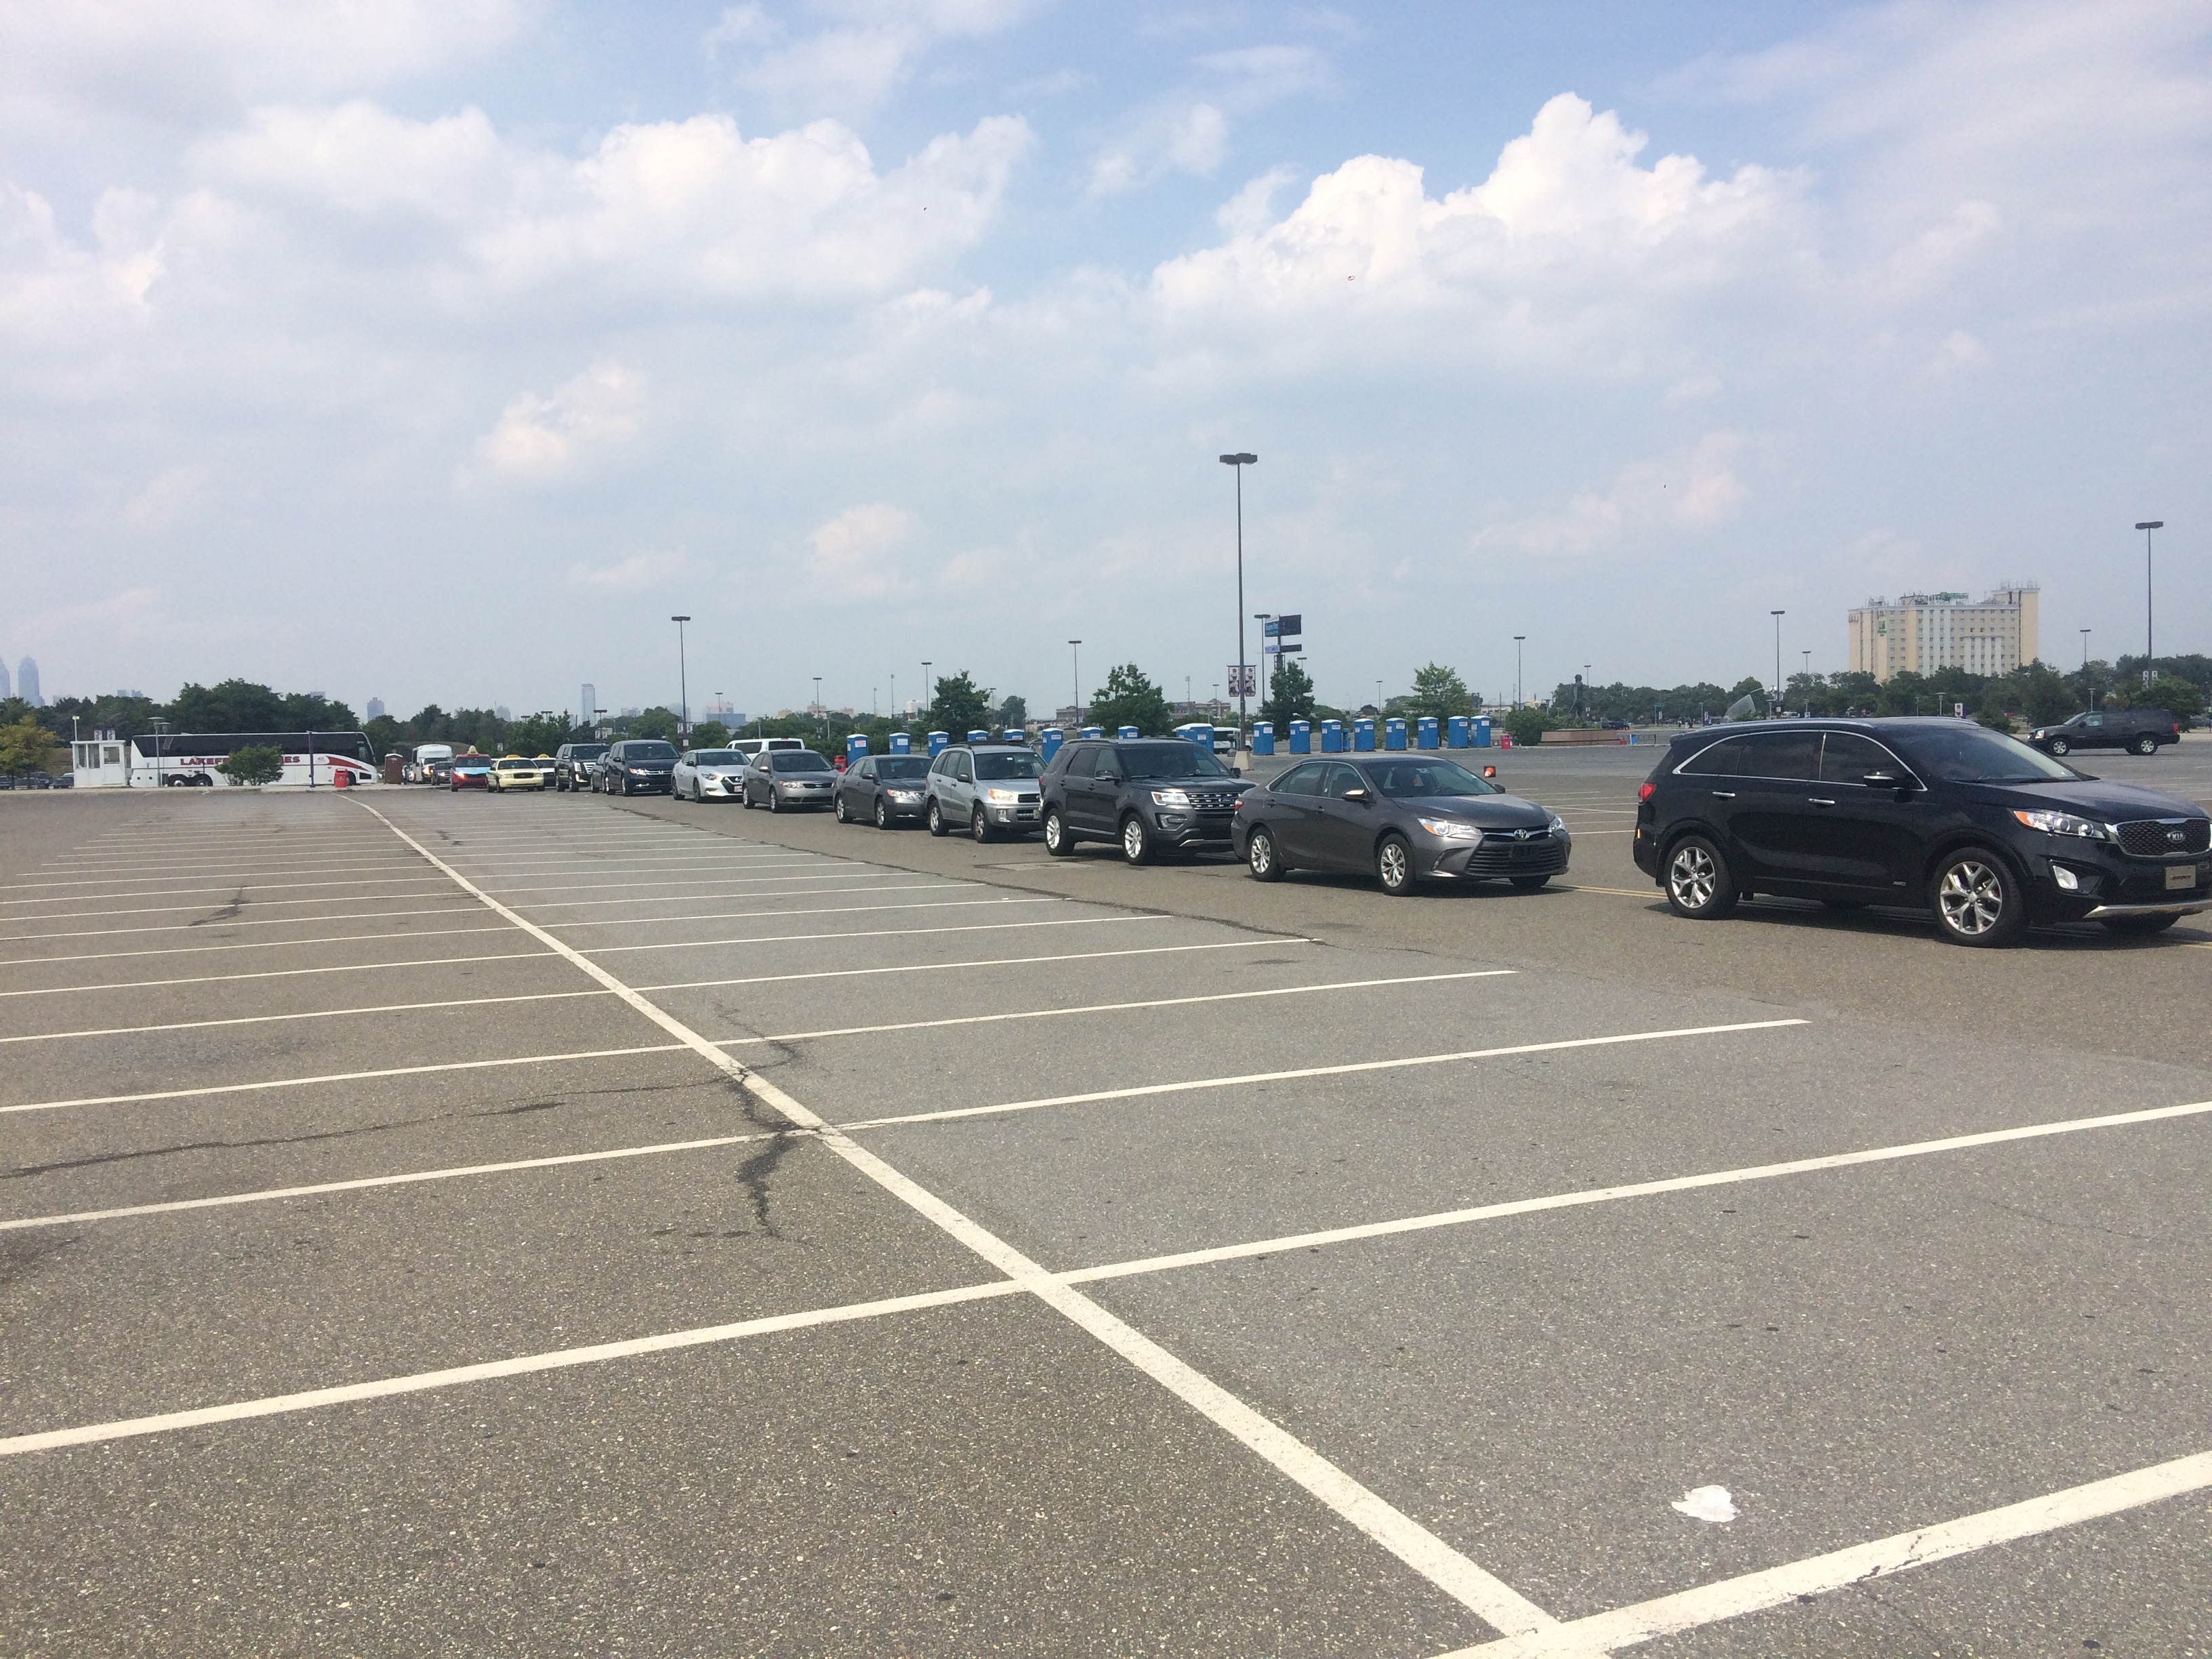 A very long line of uberX cars dropping off delegates and journalists at the DNC